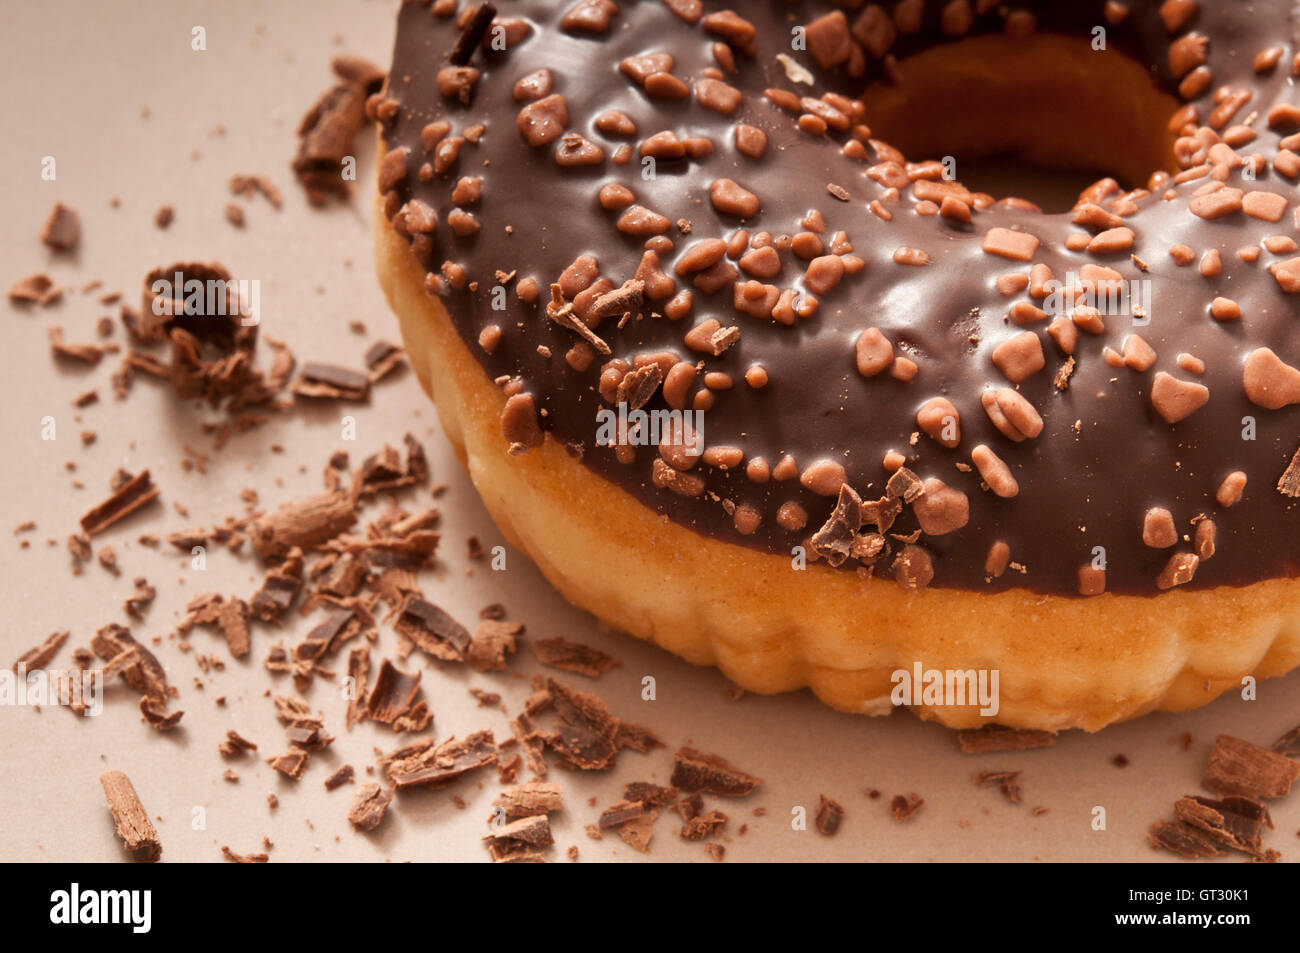 doughnut with chocolate frosting Stock Photo